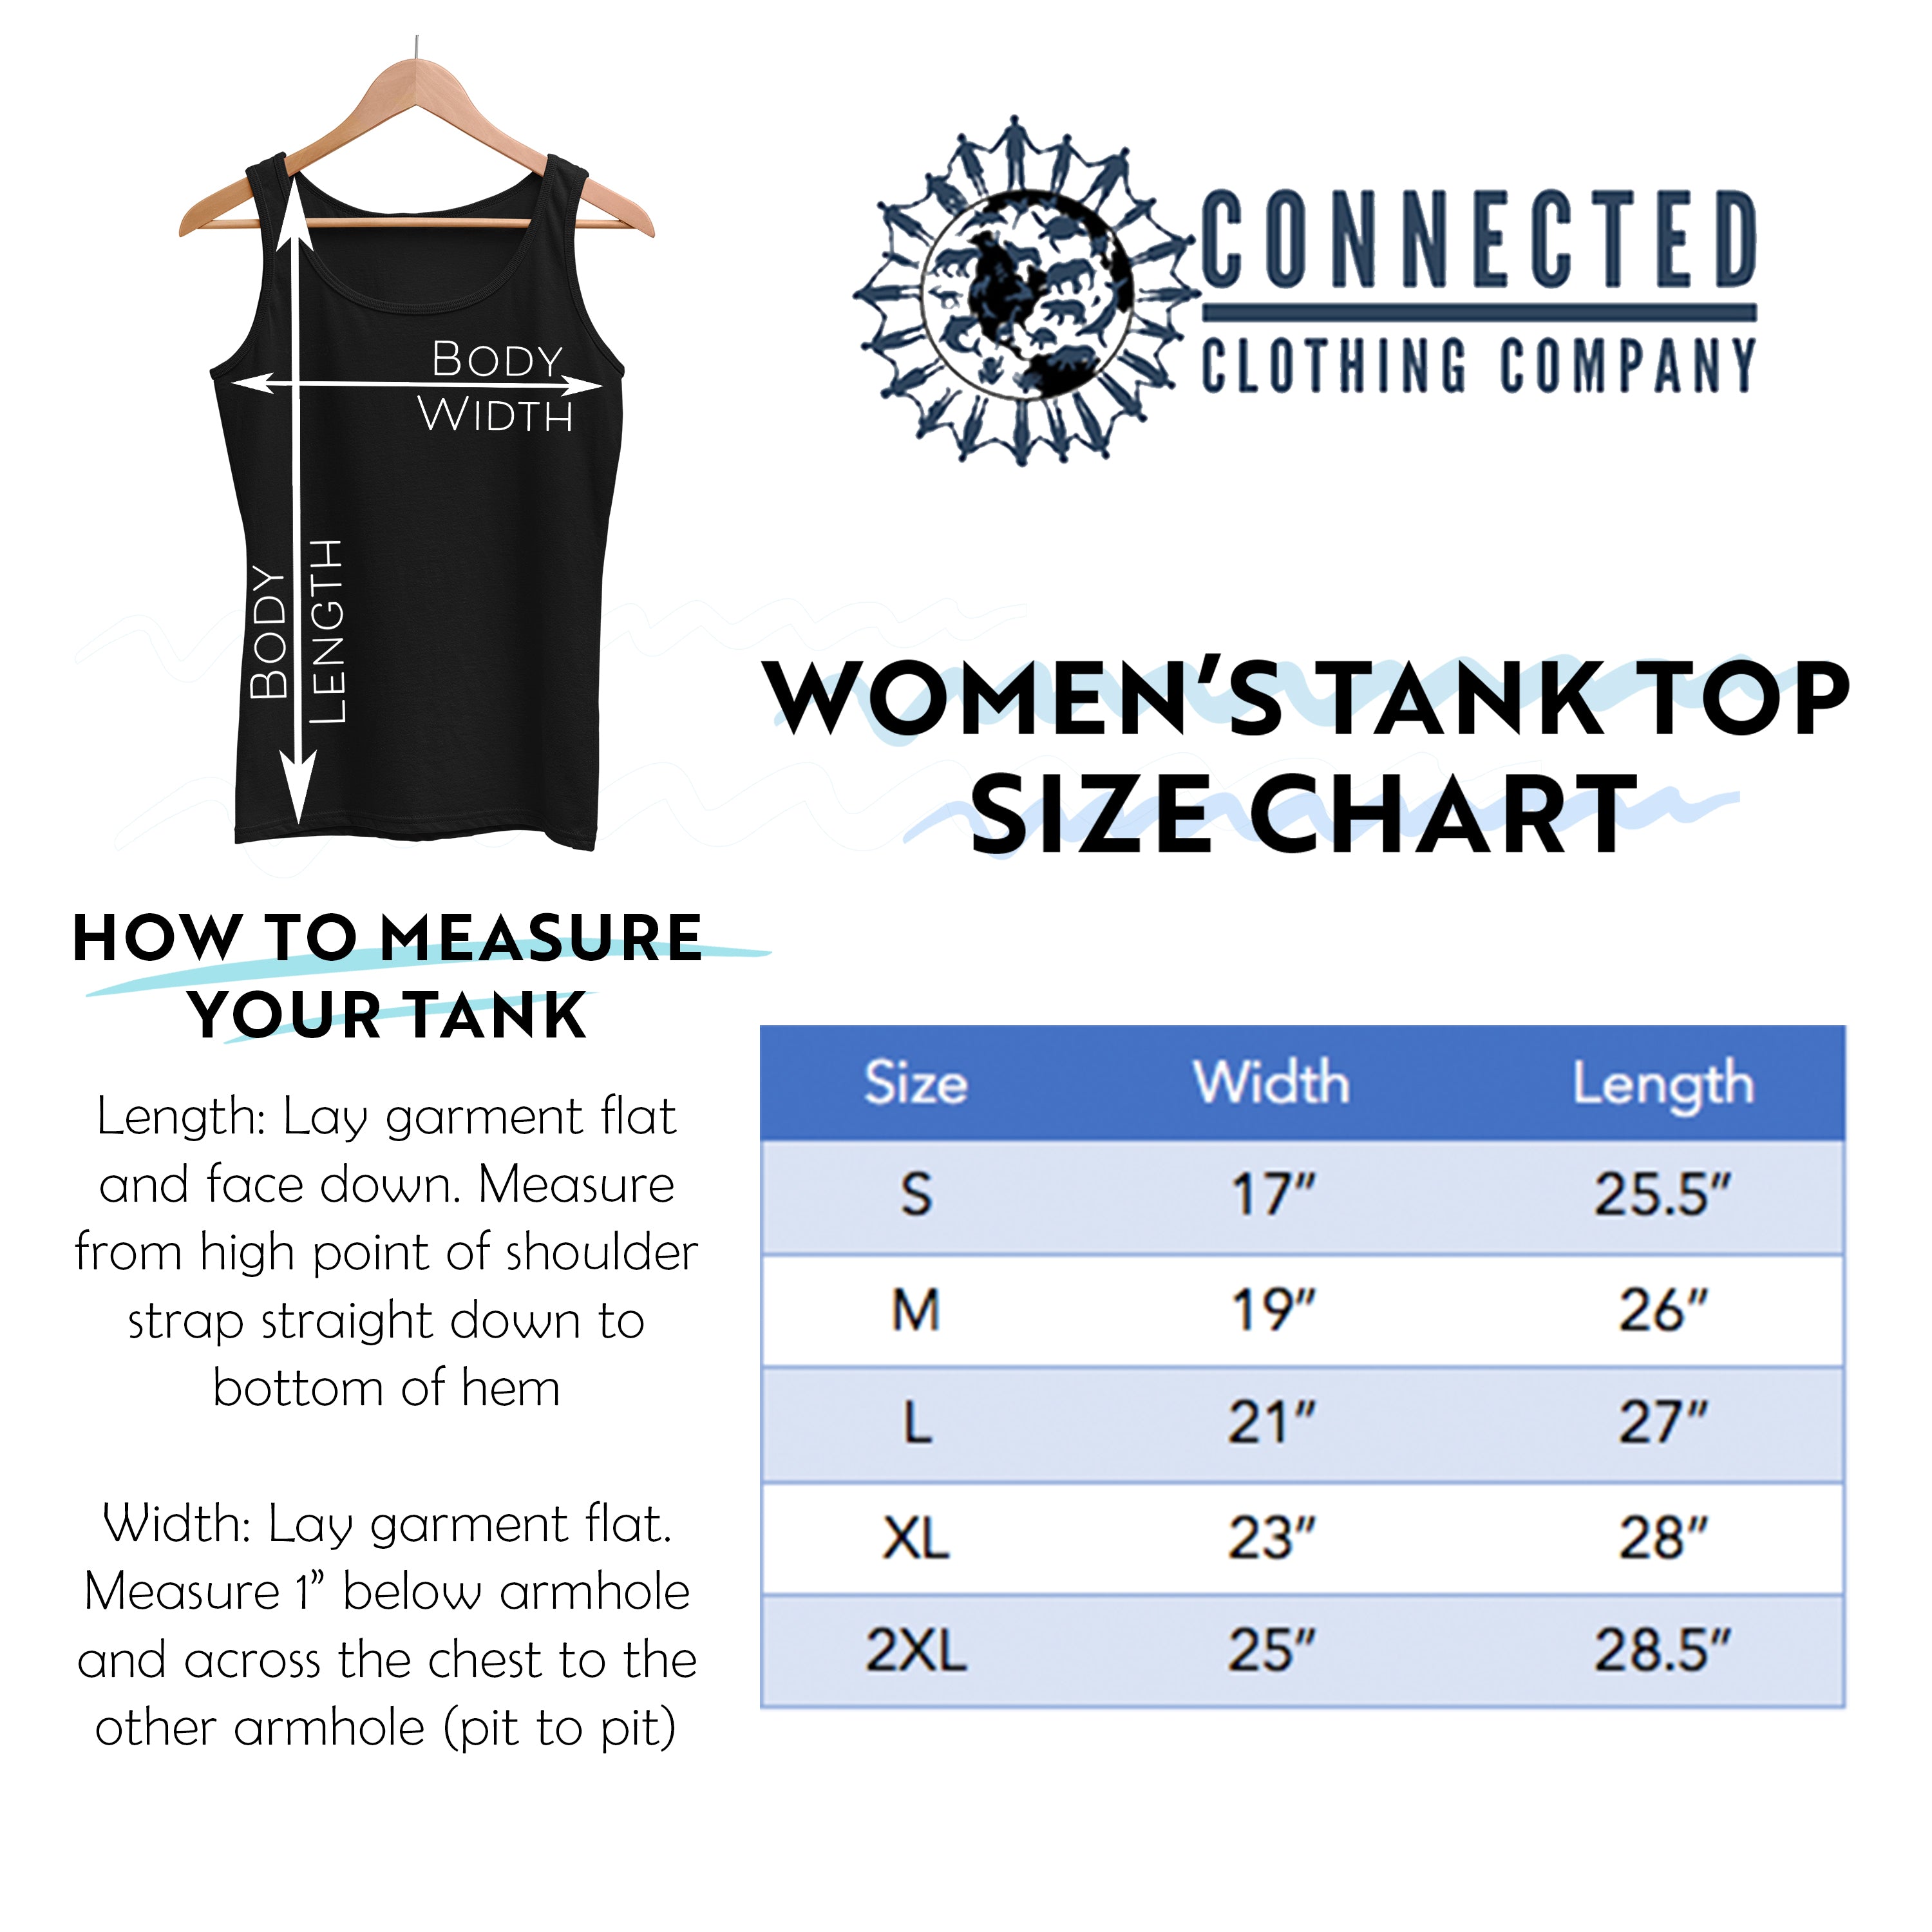 Women's Relaxed Tank Top Size Chart - marktwainstoryteller - Ethically and Sustainably Made - 10% donated to Mission Blue ocean conservation